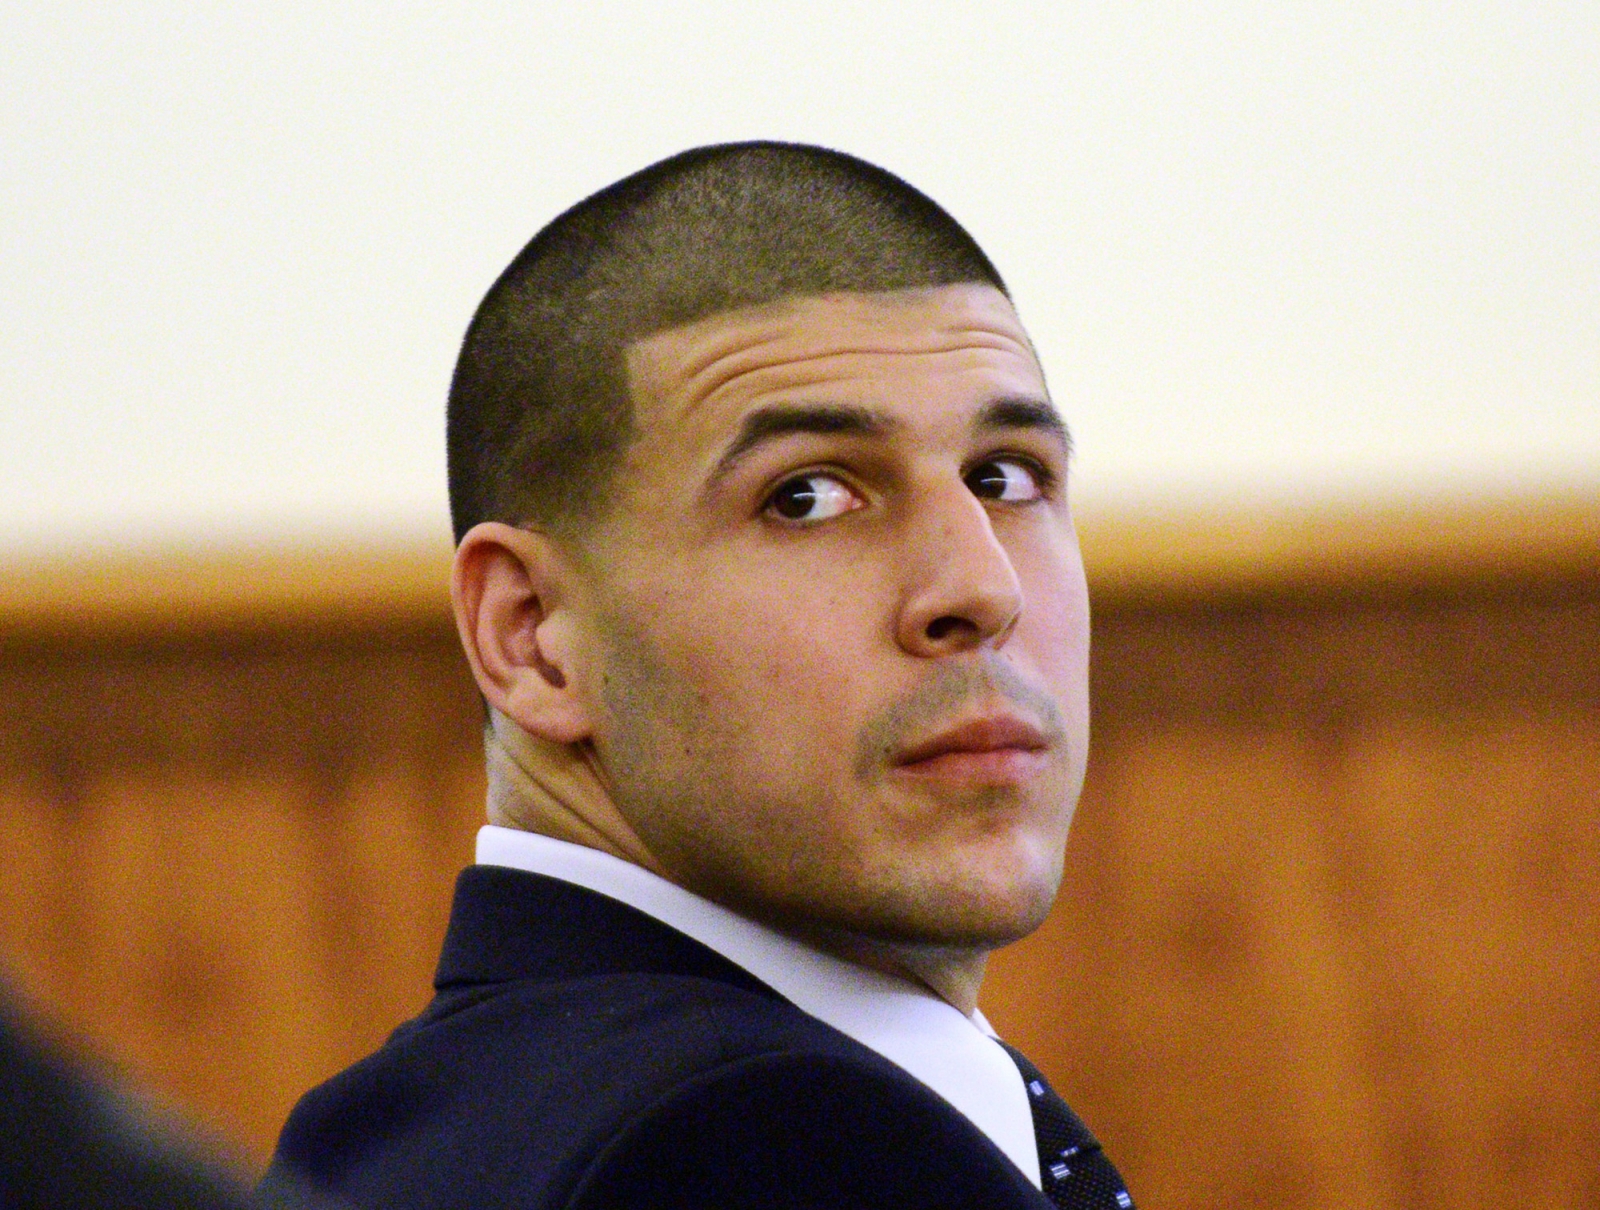 NFL star Aaron Hernandez's third suicide letter was not meant for his alleged jailhouse lover